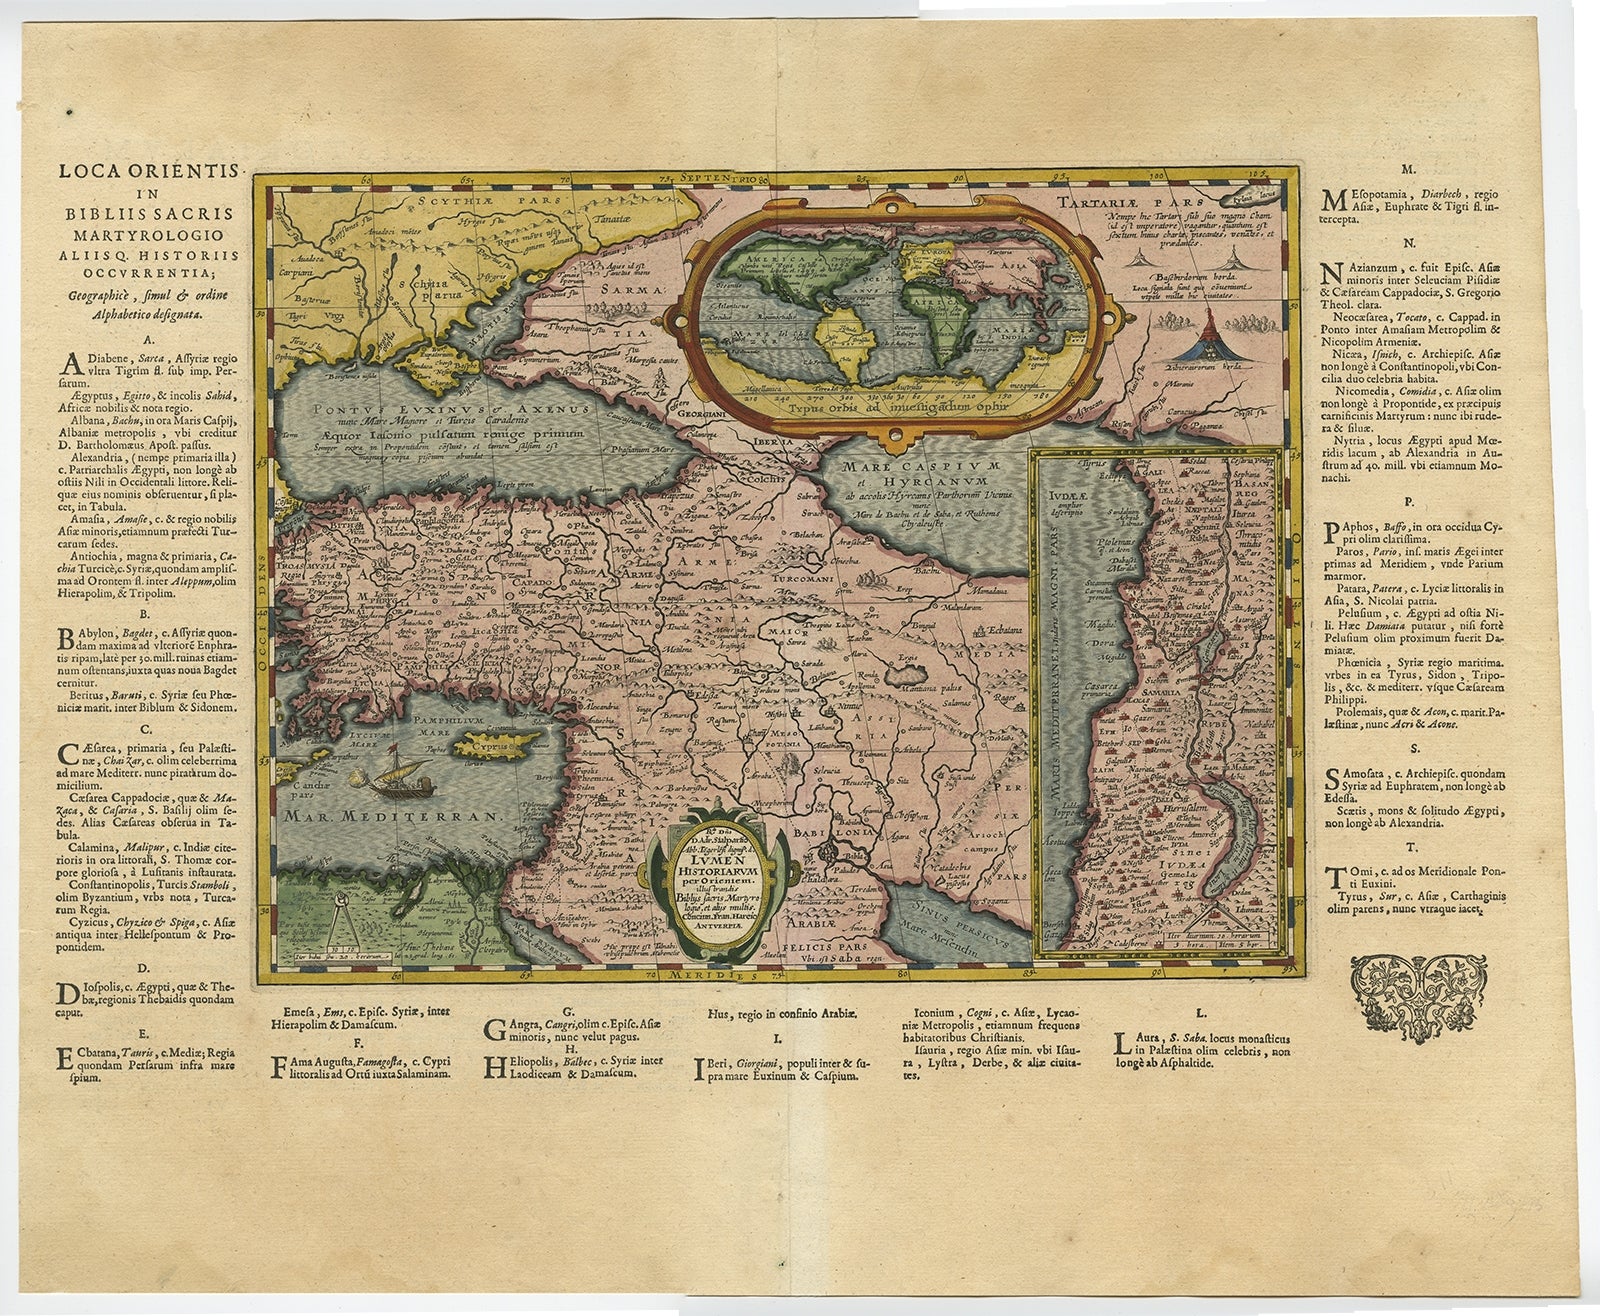 Antique map titled 'Lumen Historium per Orientem (..).' 

Scarce map of the Middle East, surrounded by Latin text. The two insets show Israel and an oval world map. This map (from the last edition of Ortelius Theatri Orbis Terrarum Parergon, 1624)